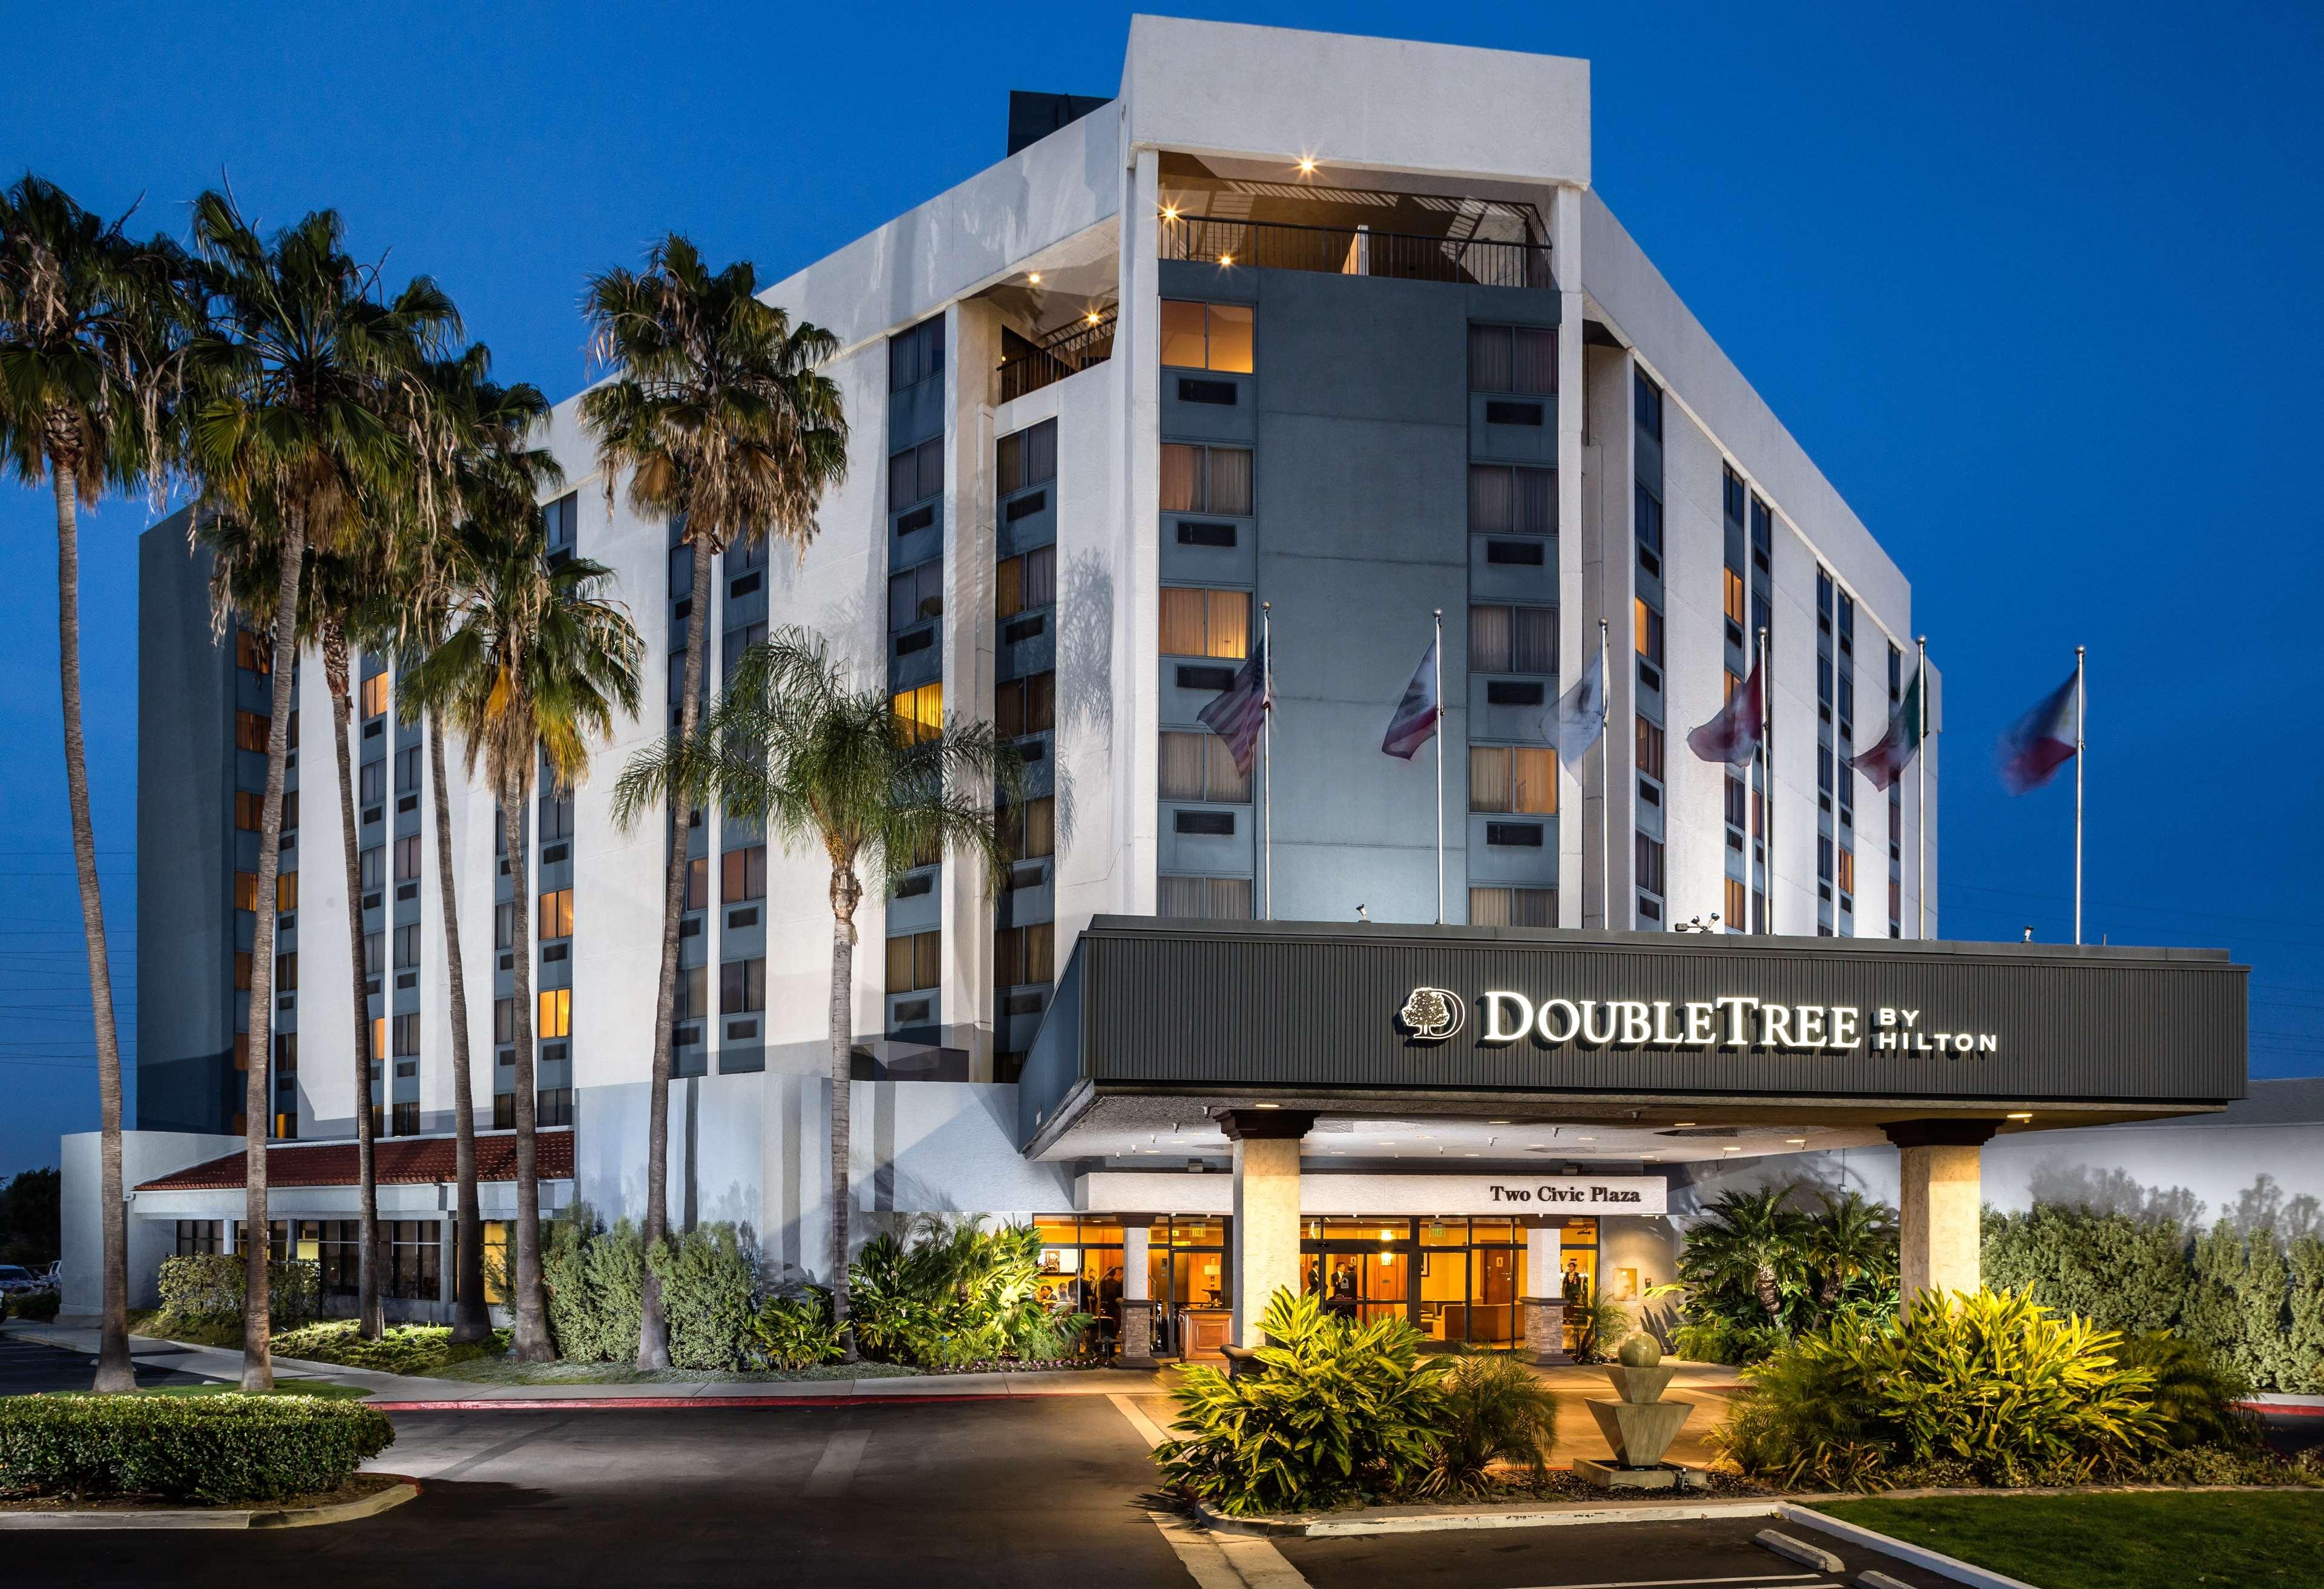 DoubleTree by Hilton Hotel Carson image